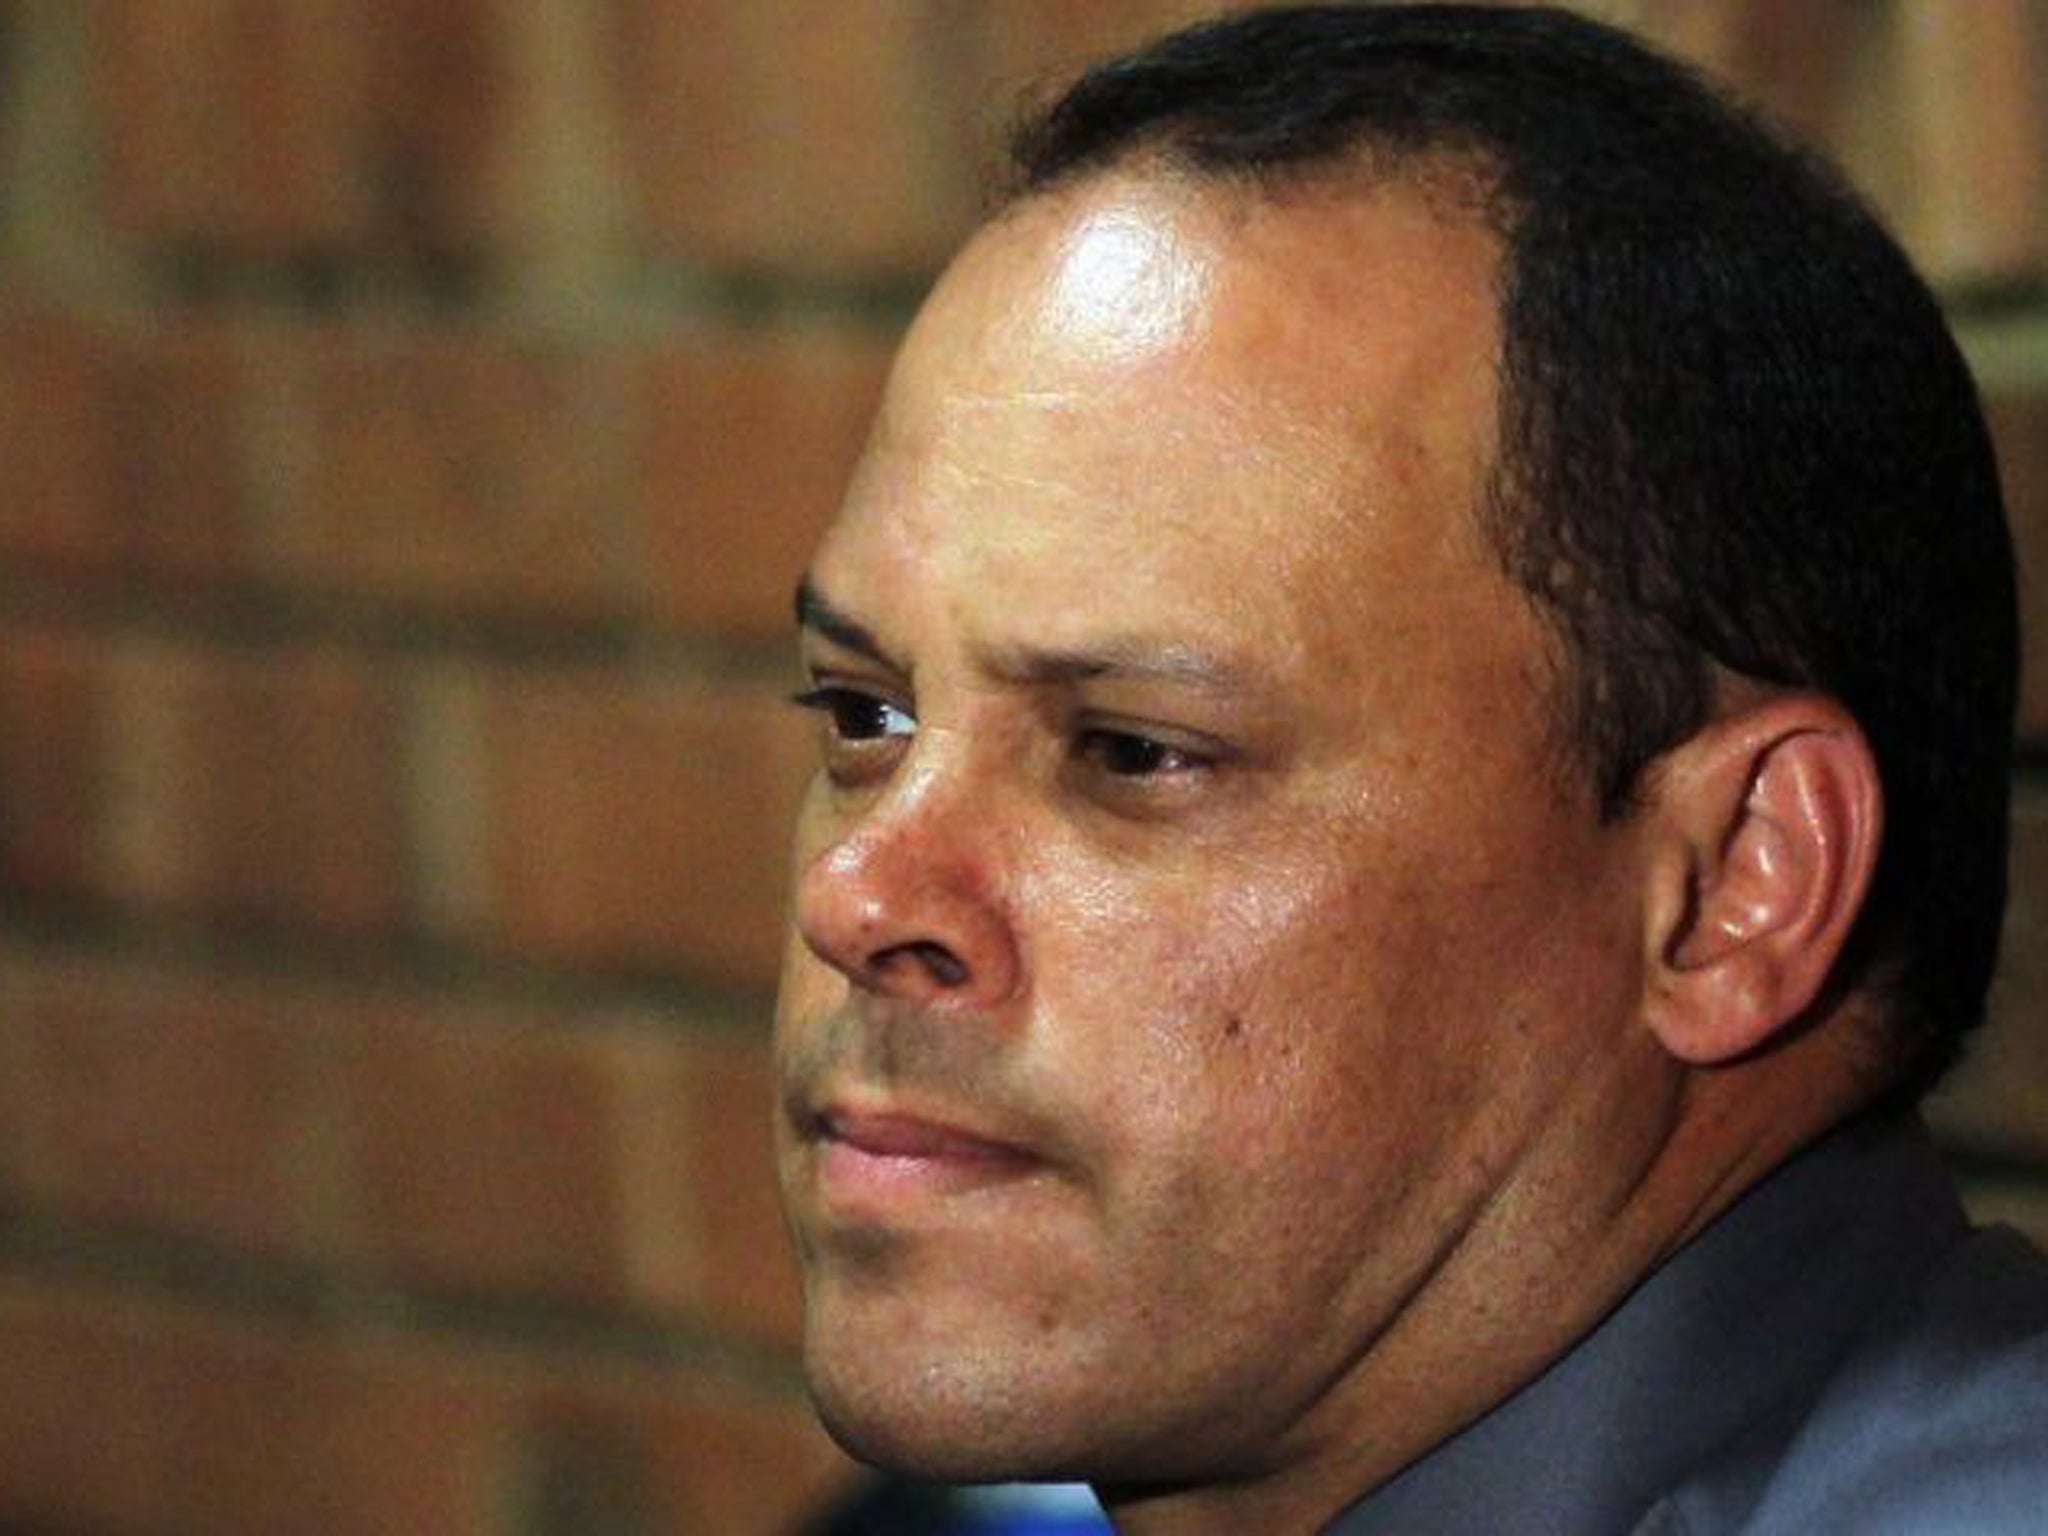 Botha faces attempted murder charges in a case that alleges that he fired on a vehicle in an attempt to stop it, putting seven lives in danger